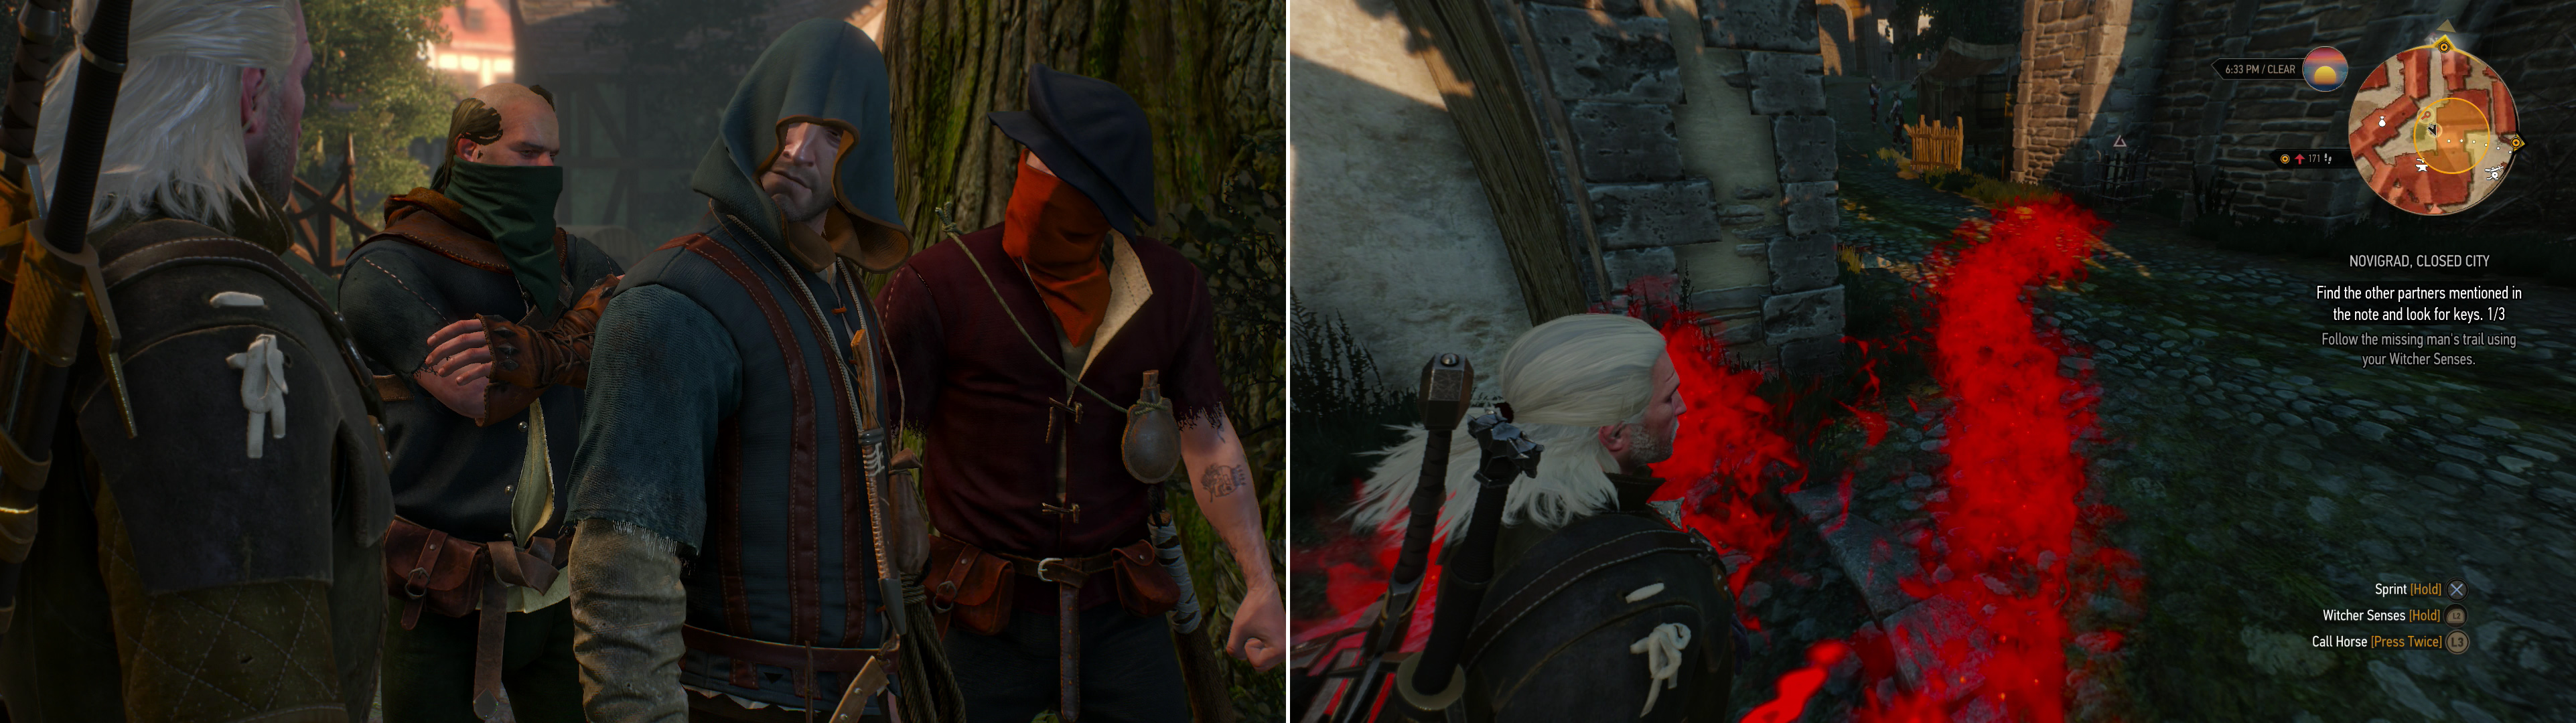 A group of Bandits asks you to help them find their "friend" (left). Follow the scent trial (right) and blood until you find who they seek (right).